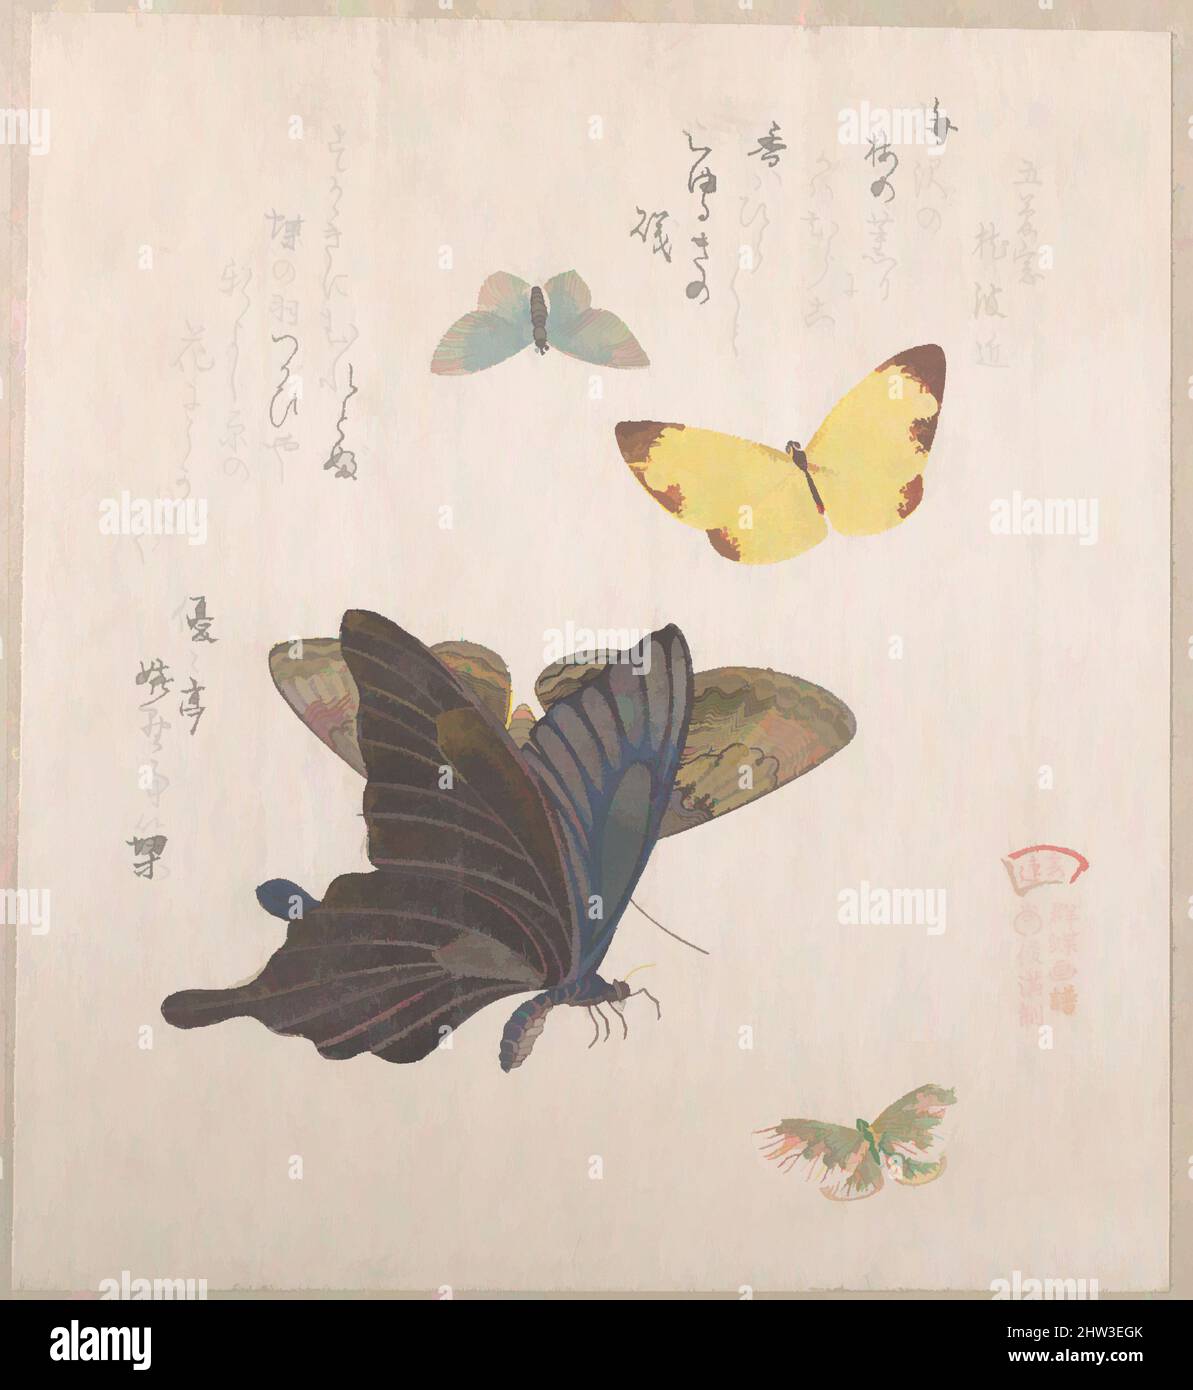 Art inspired by Various Moths and Butterflies, 19th century, Japan, Part of an album of woodblock prints (surimono); ink and color on paper, 7 13/16 x 7 13/16 in. (19.8 x 19.8 cm), Prints, Kubo Shunman (Japanese, 1757–1820, Classic works modernized by Artotop with a splash of modernity. Shapes, color and value, eye-catching visual impact on art. Emotions through freedom of artworks in a contemporary way. A timeless message pursuing a wildly creative new direction. Artists turning to the digital medium and creating the Artotop NFT Stock Photo